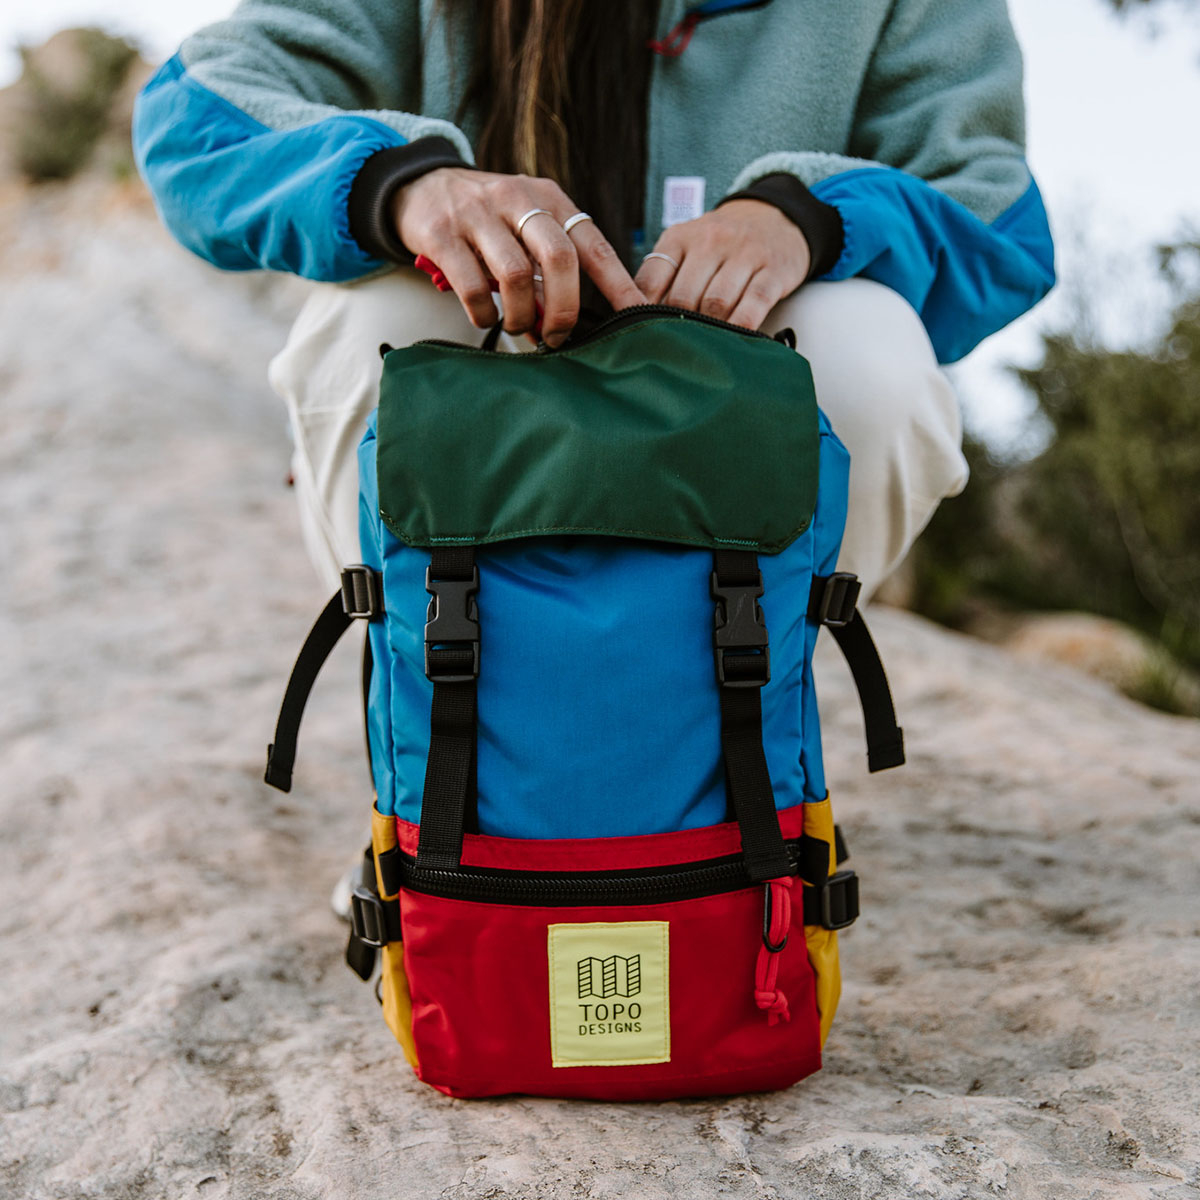 Topo Designs Rover Pack - Mini, statement-making bag that’s the perfect size for errands around town or on the trail